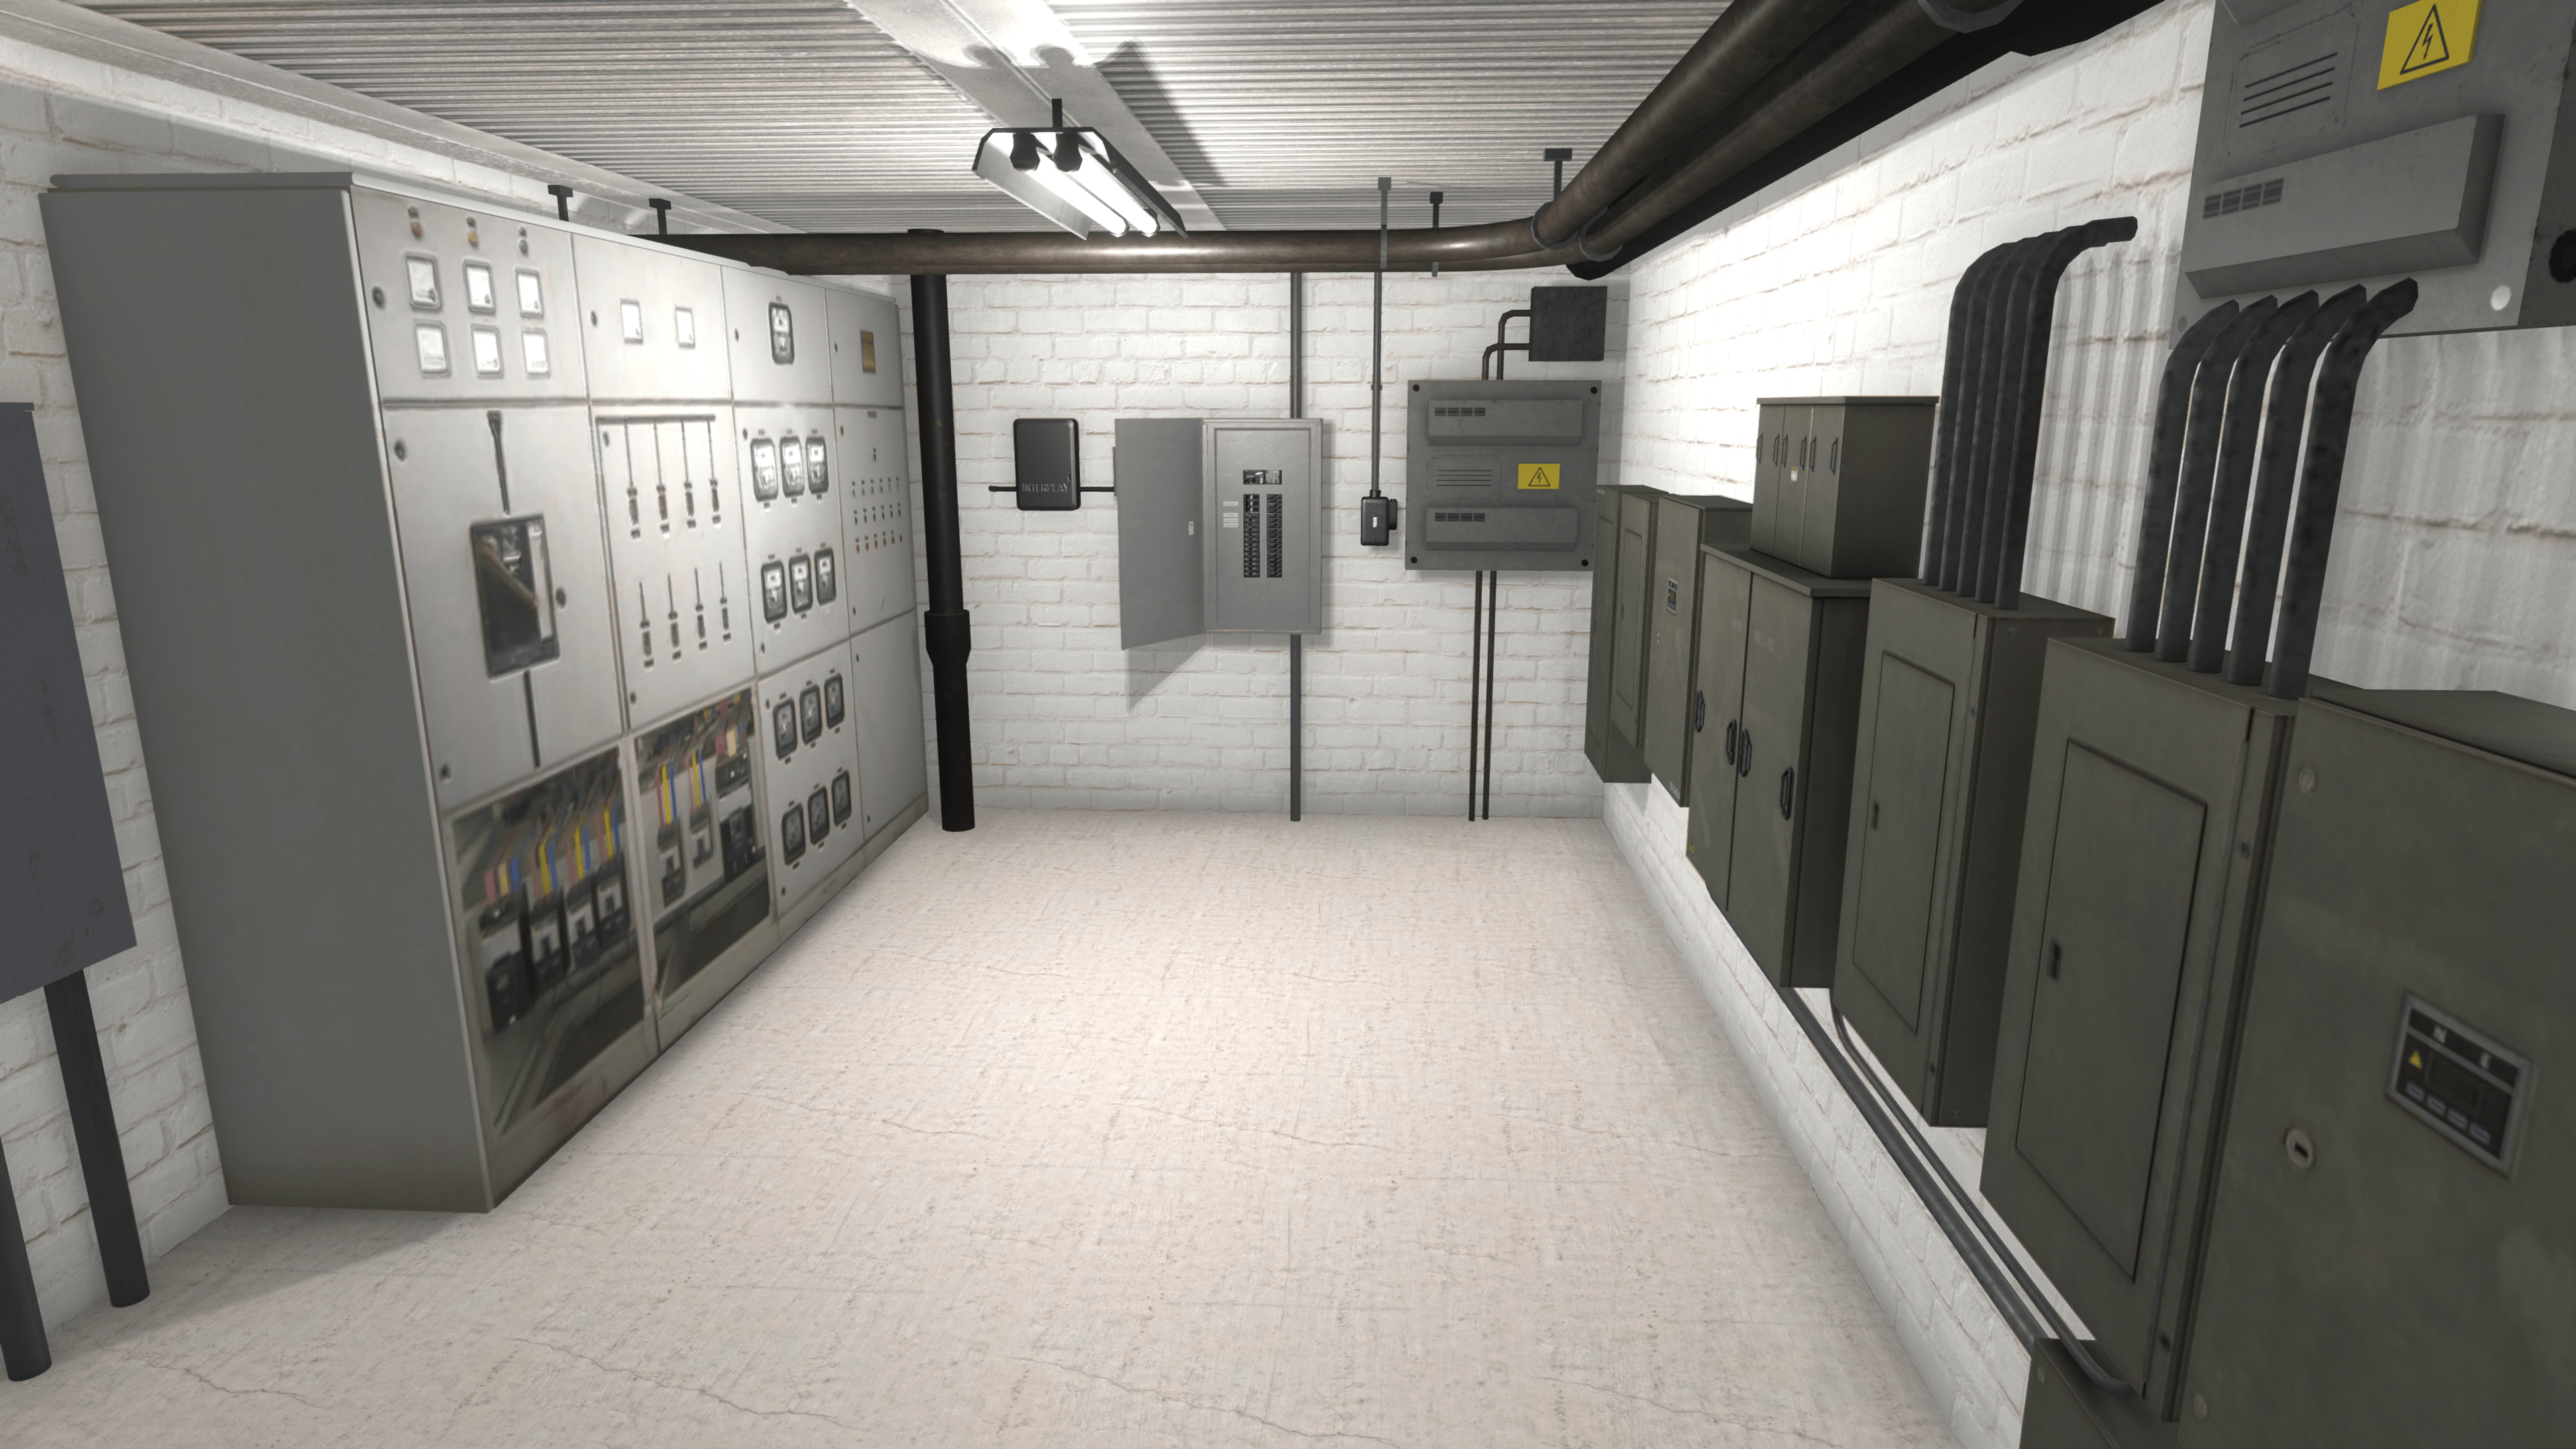 Facilities maintenance and electrical simulations